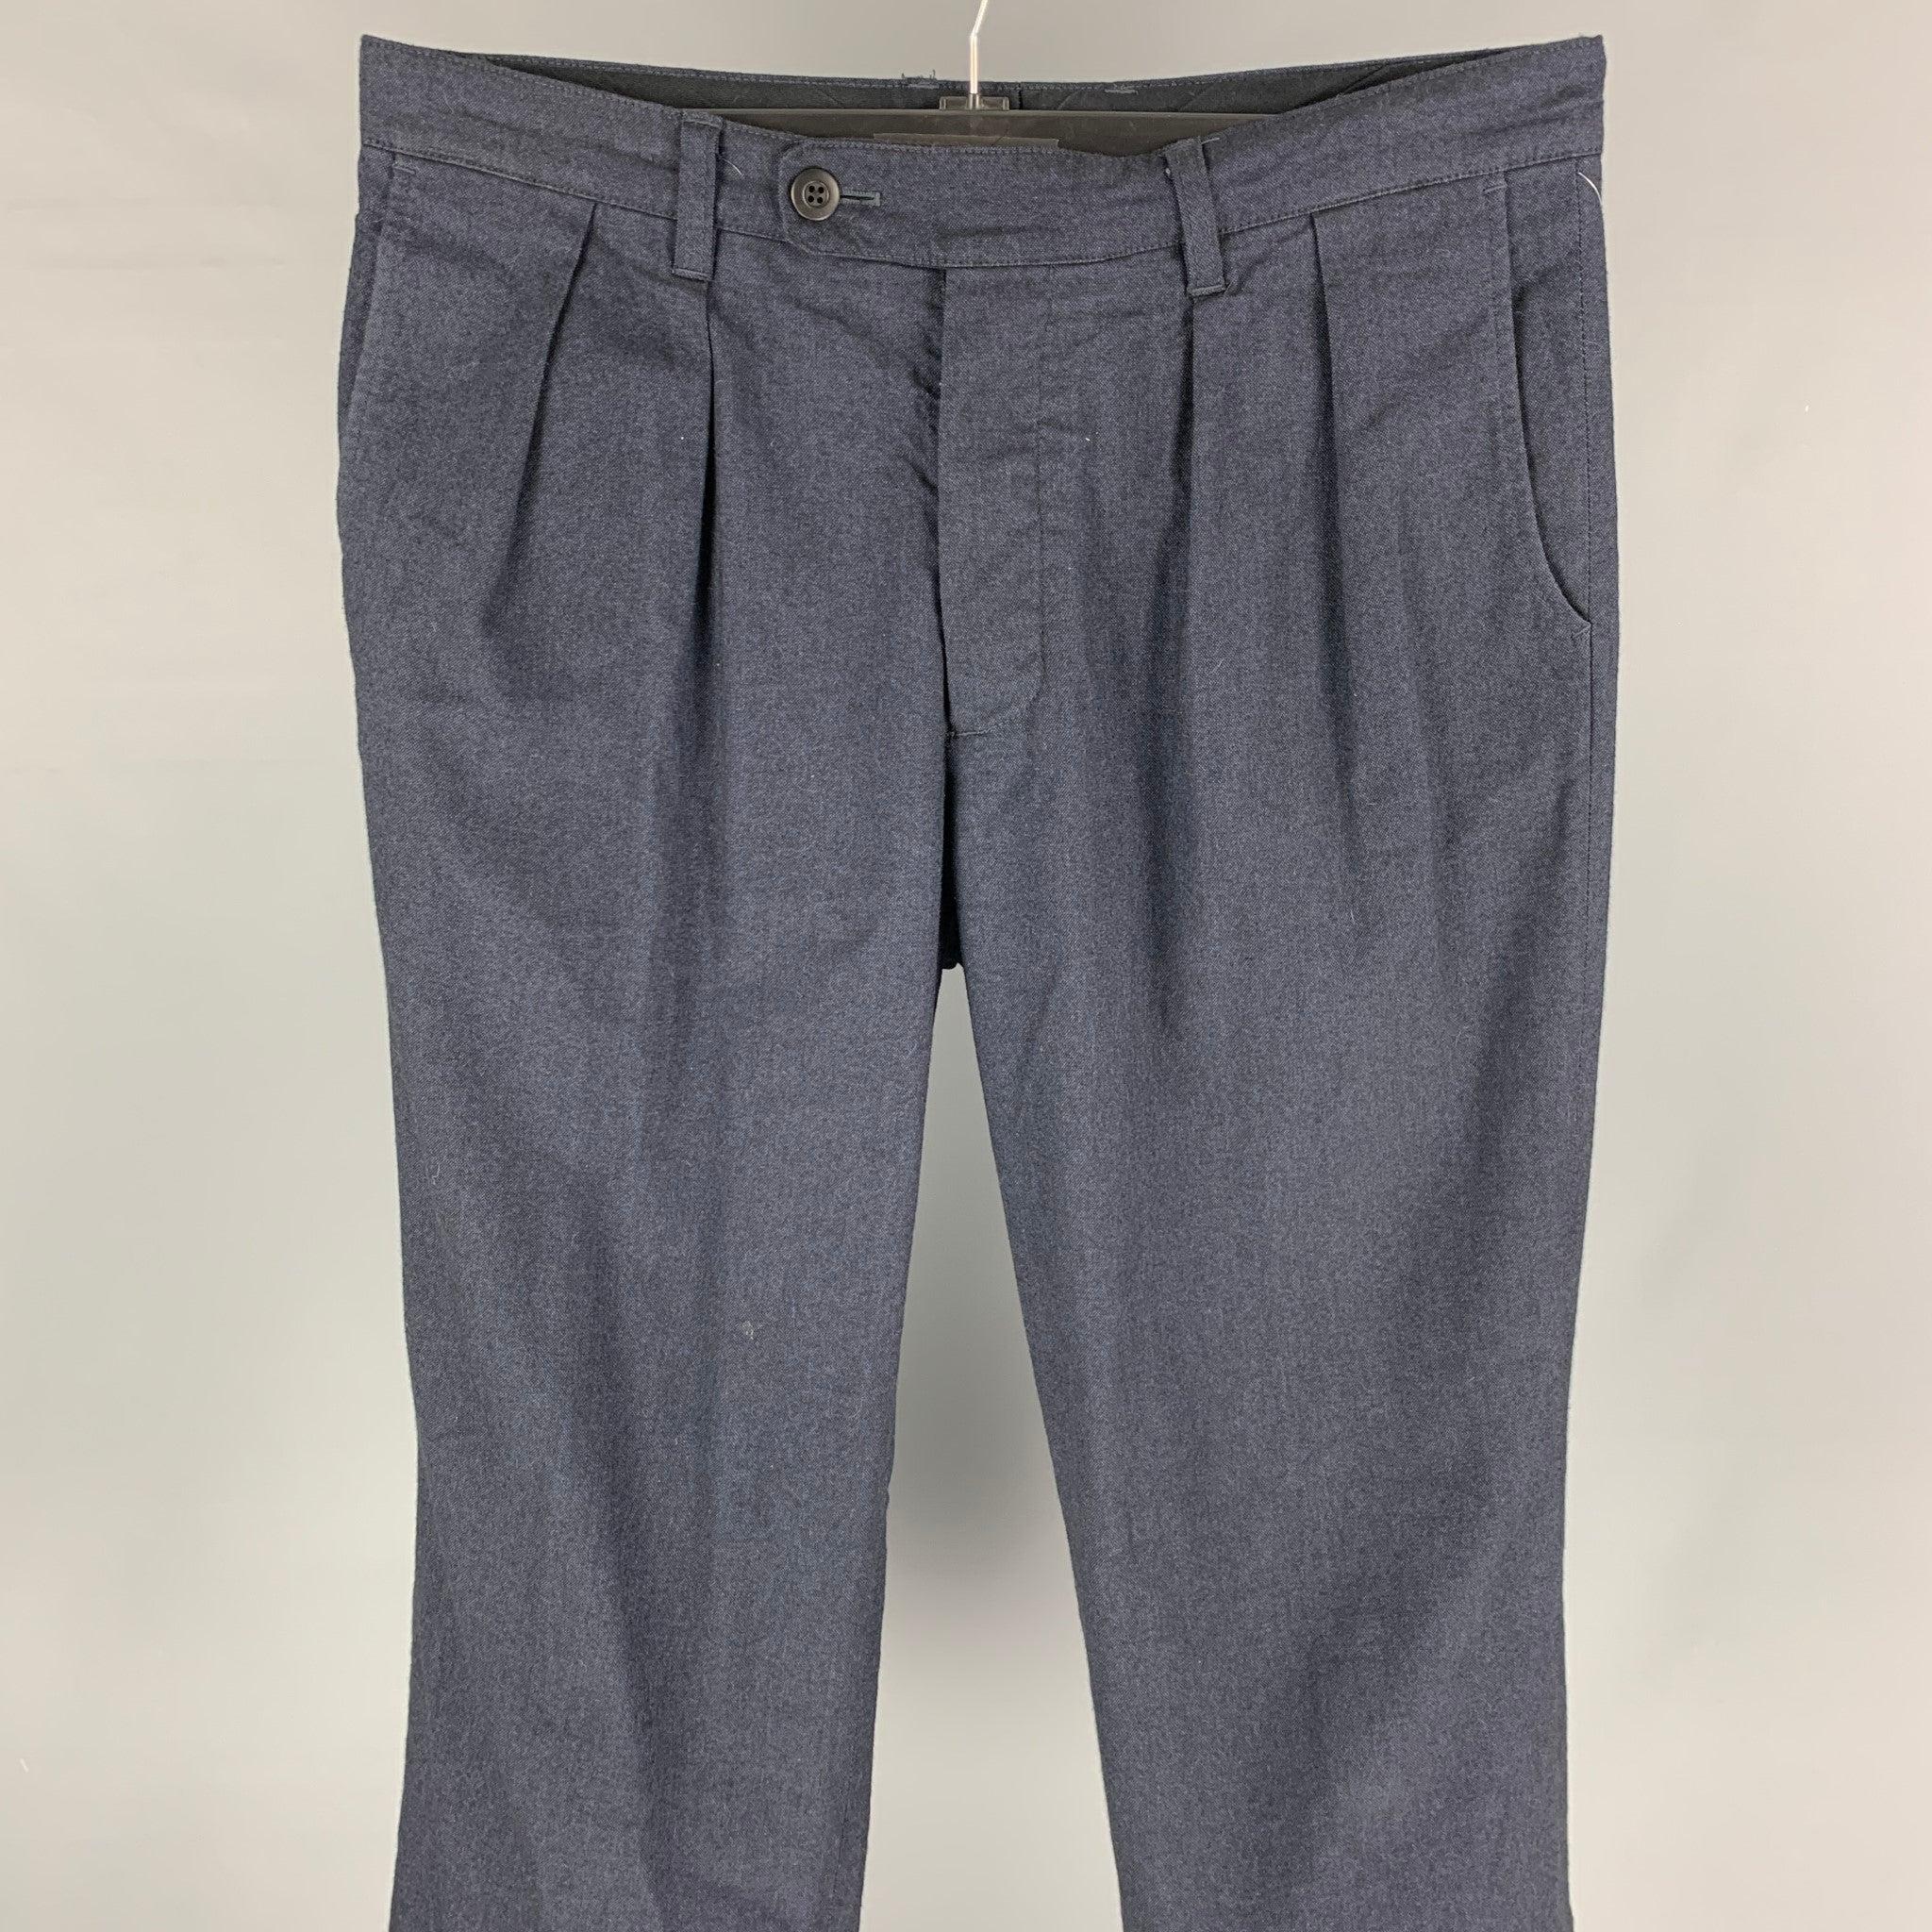 TS (S) dress pants comes in a indigo cotton blend featuring a pleated style, wide leg, cuffed, and a button fly closure. Made in Japan.
Very Good
Pre-Owned Condition. 

Marked:   2 

Measurements: 
  Waist: 34 inches  Rise: 12.5 inches  Inseam: 28